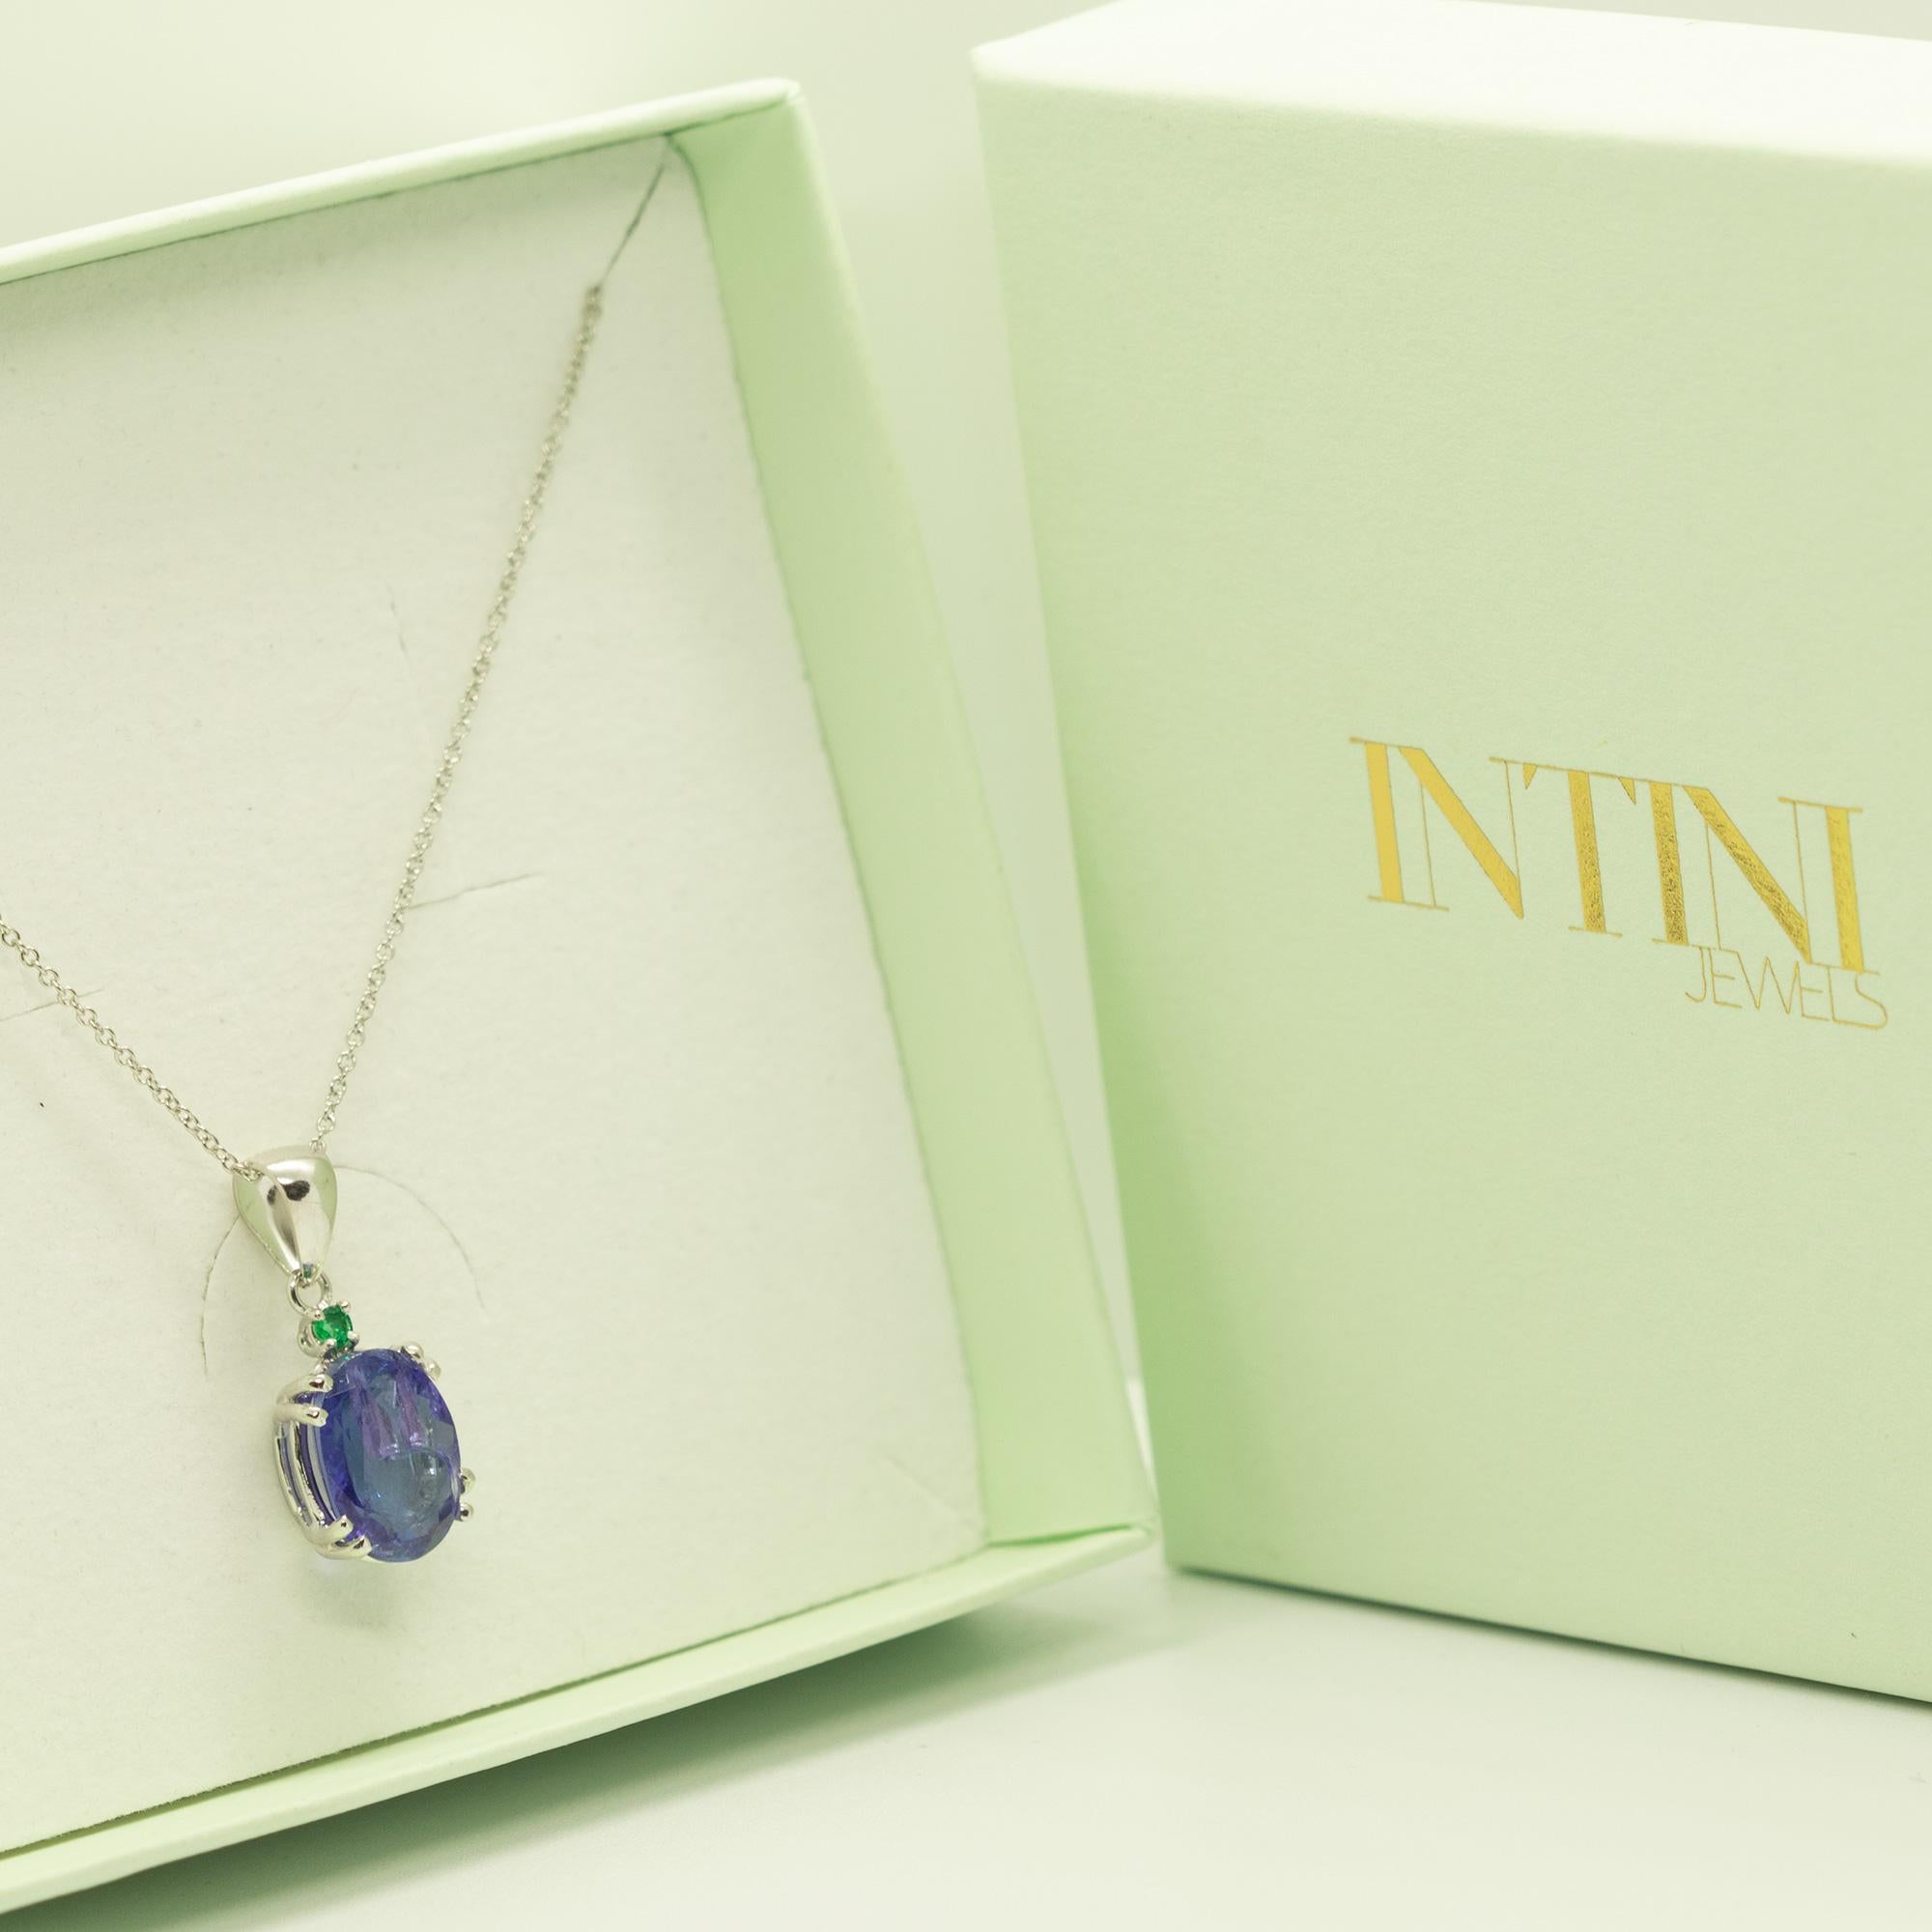 Intini Jewels Natural Tanzanite Emerald 18k White Gold Pendant Cocktail Necklace For Sale 2